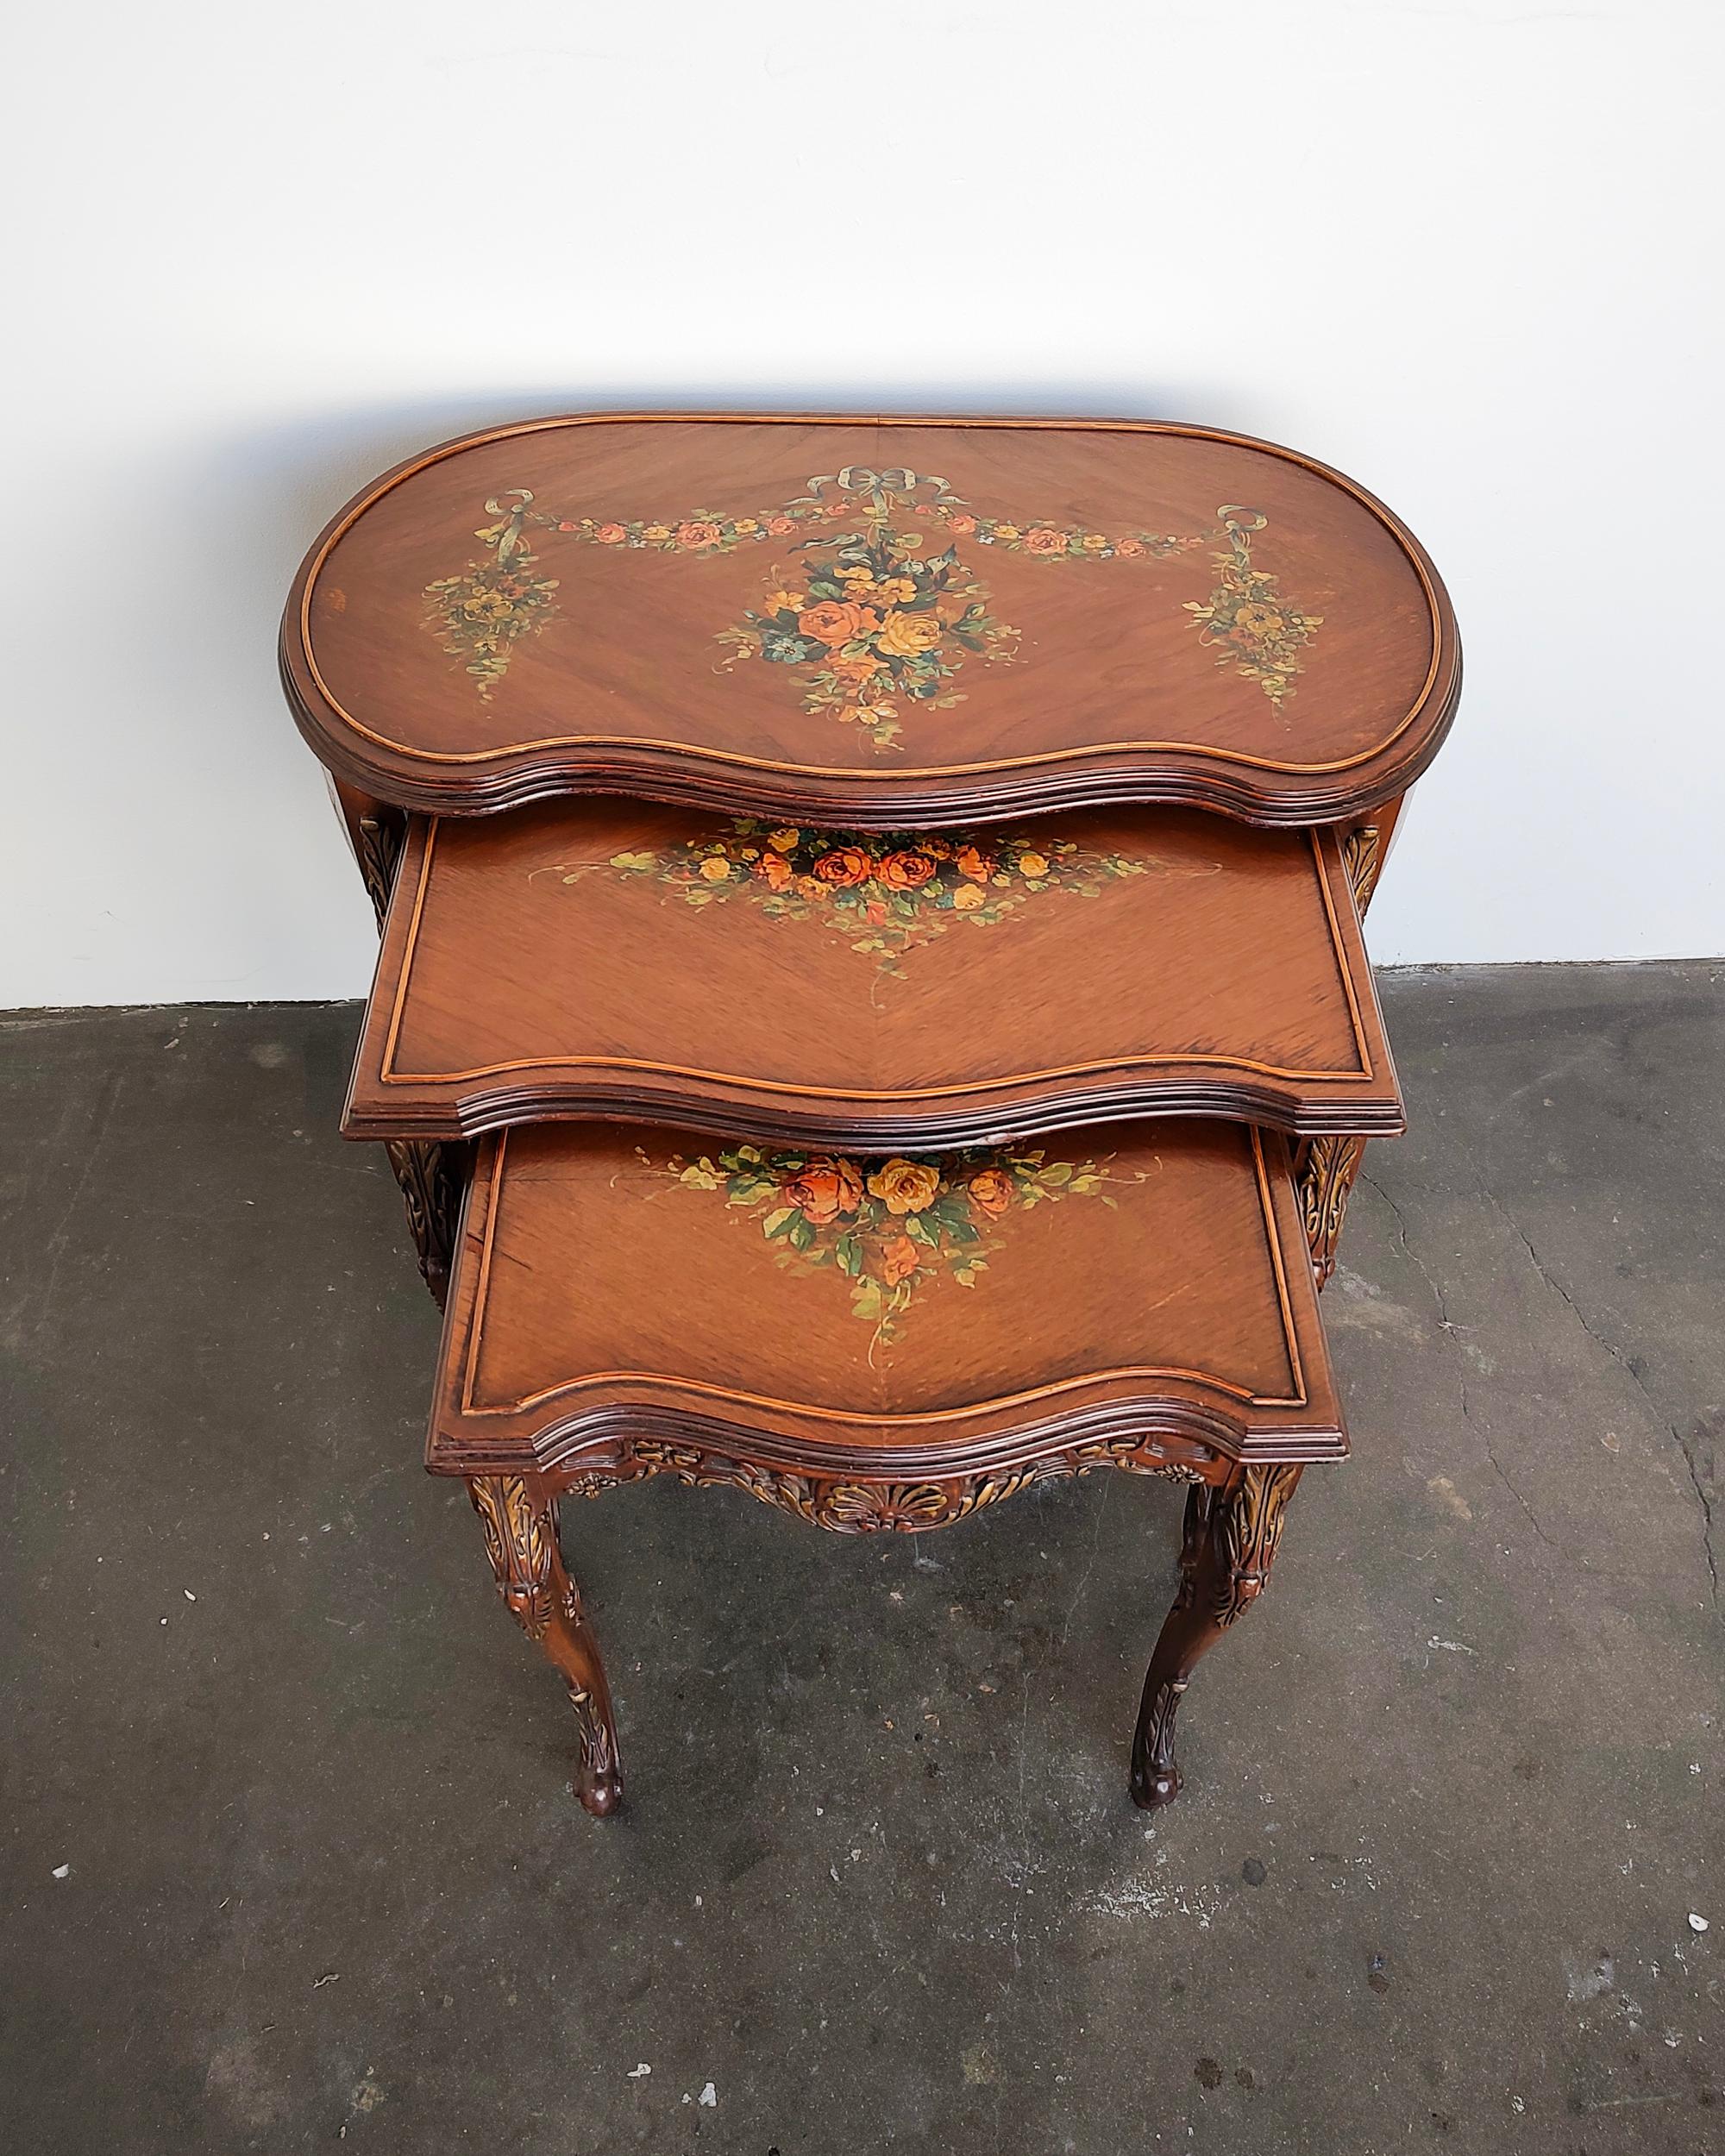 Set of three early 20th-century French Louis XV style wood nesting tables. Hand painted floral design on top, delicate curved legs and carved details with light gold embellishments. Overall great original condition, typical wear consistent with age.